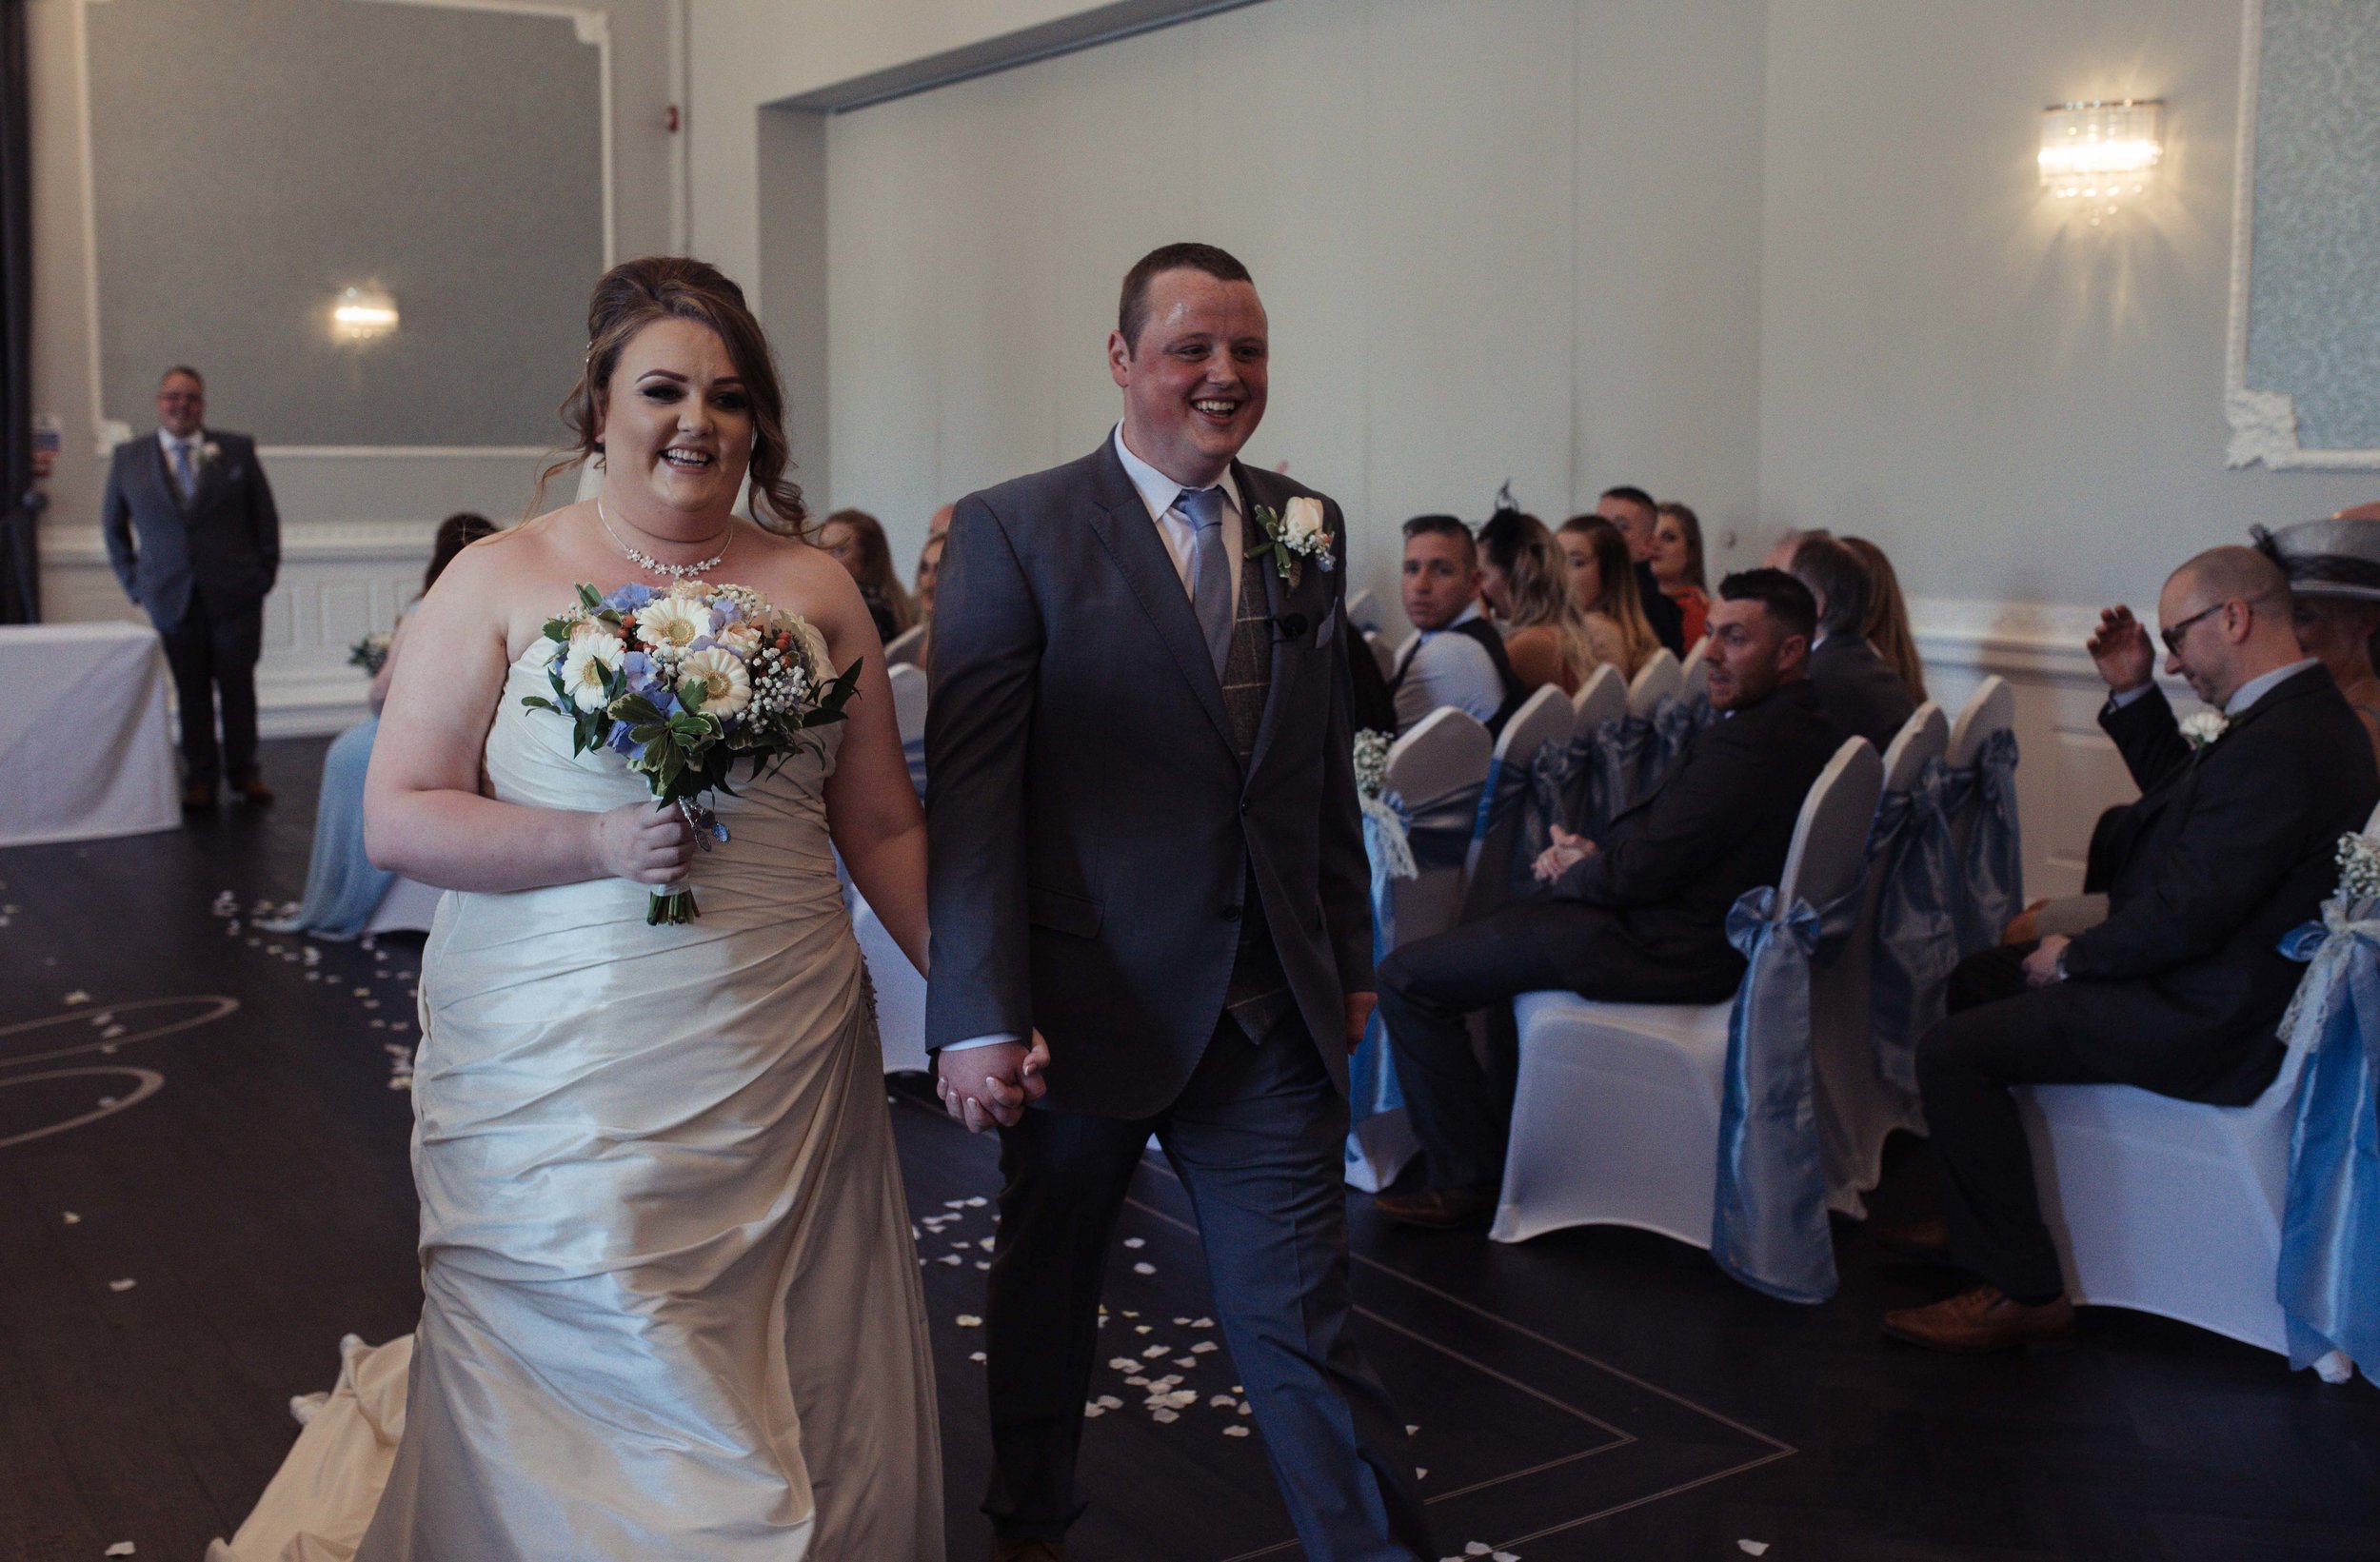 Smiling bride and groom walk out of the ceremony venue together, holding hands